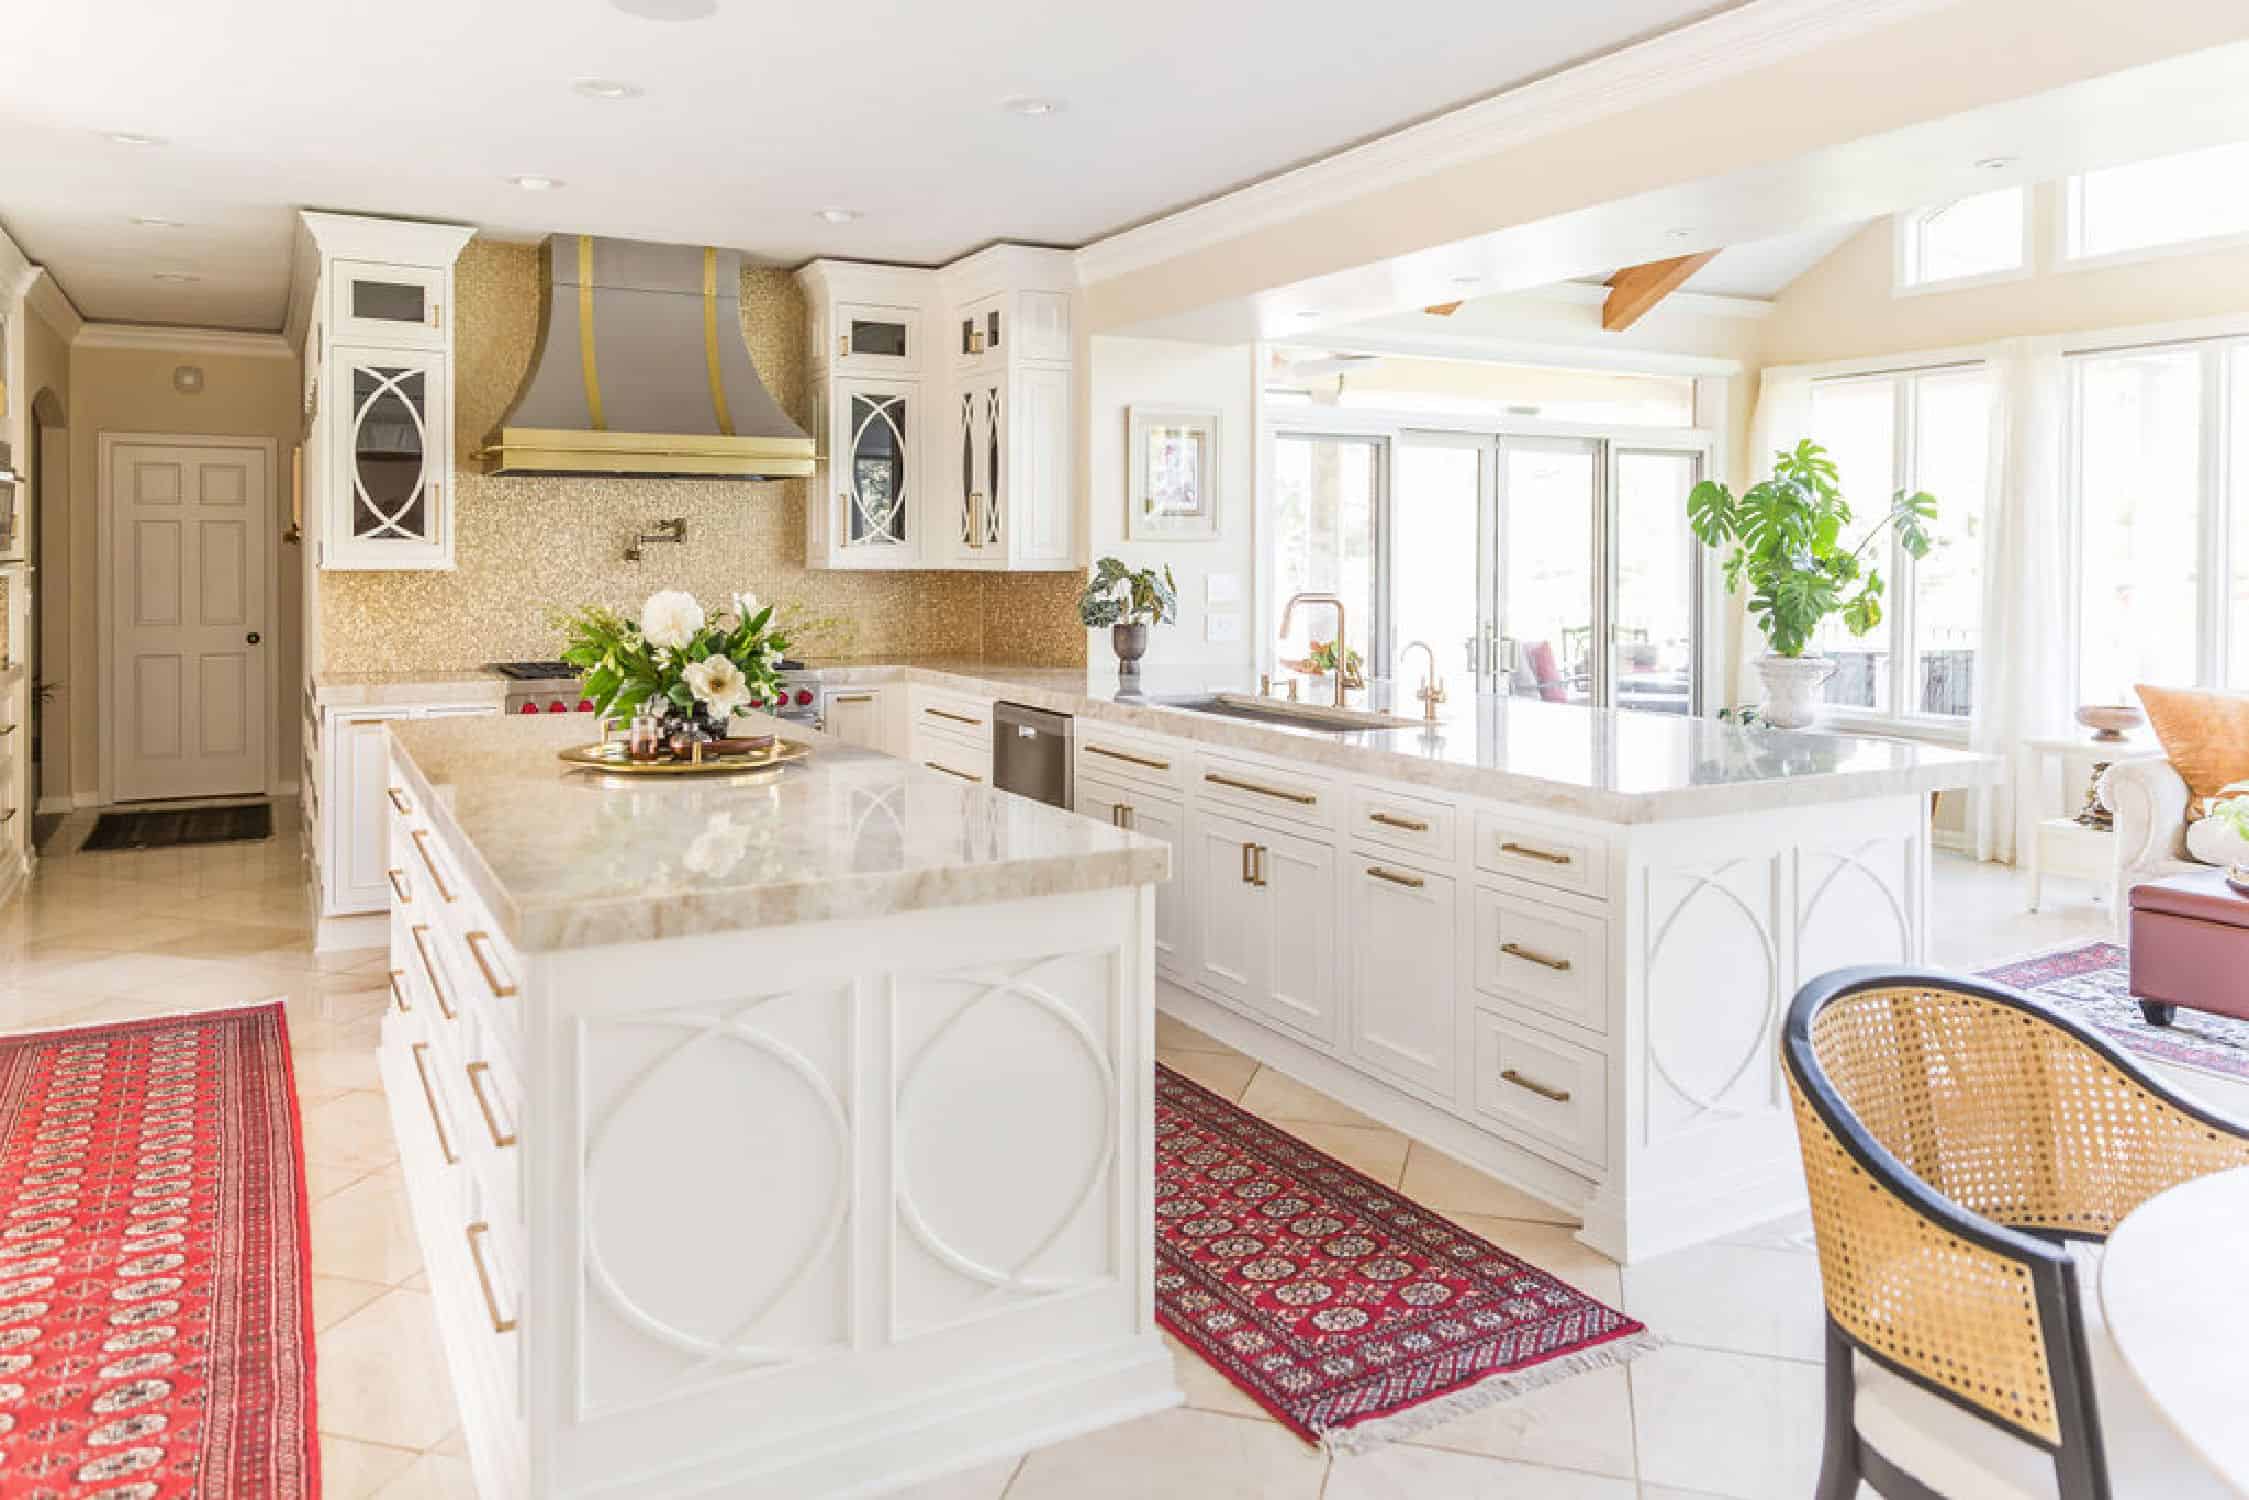 Nicholas Design Build | A remodeled white kitchen with a rug in the middle.